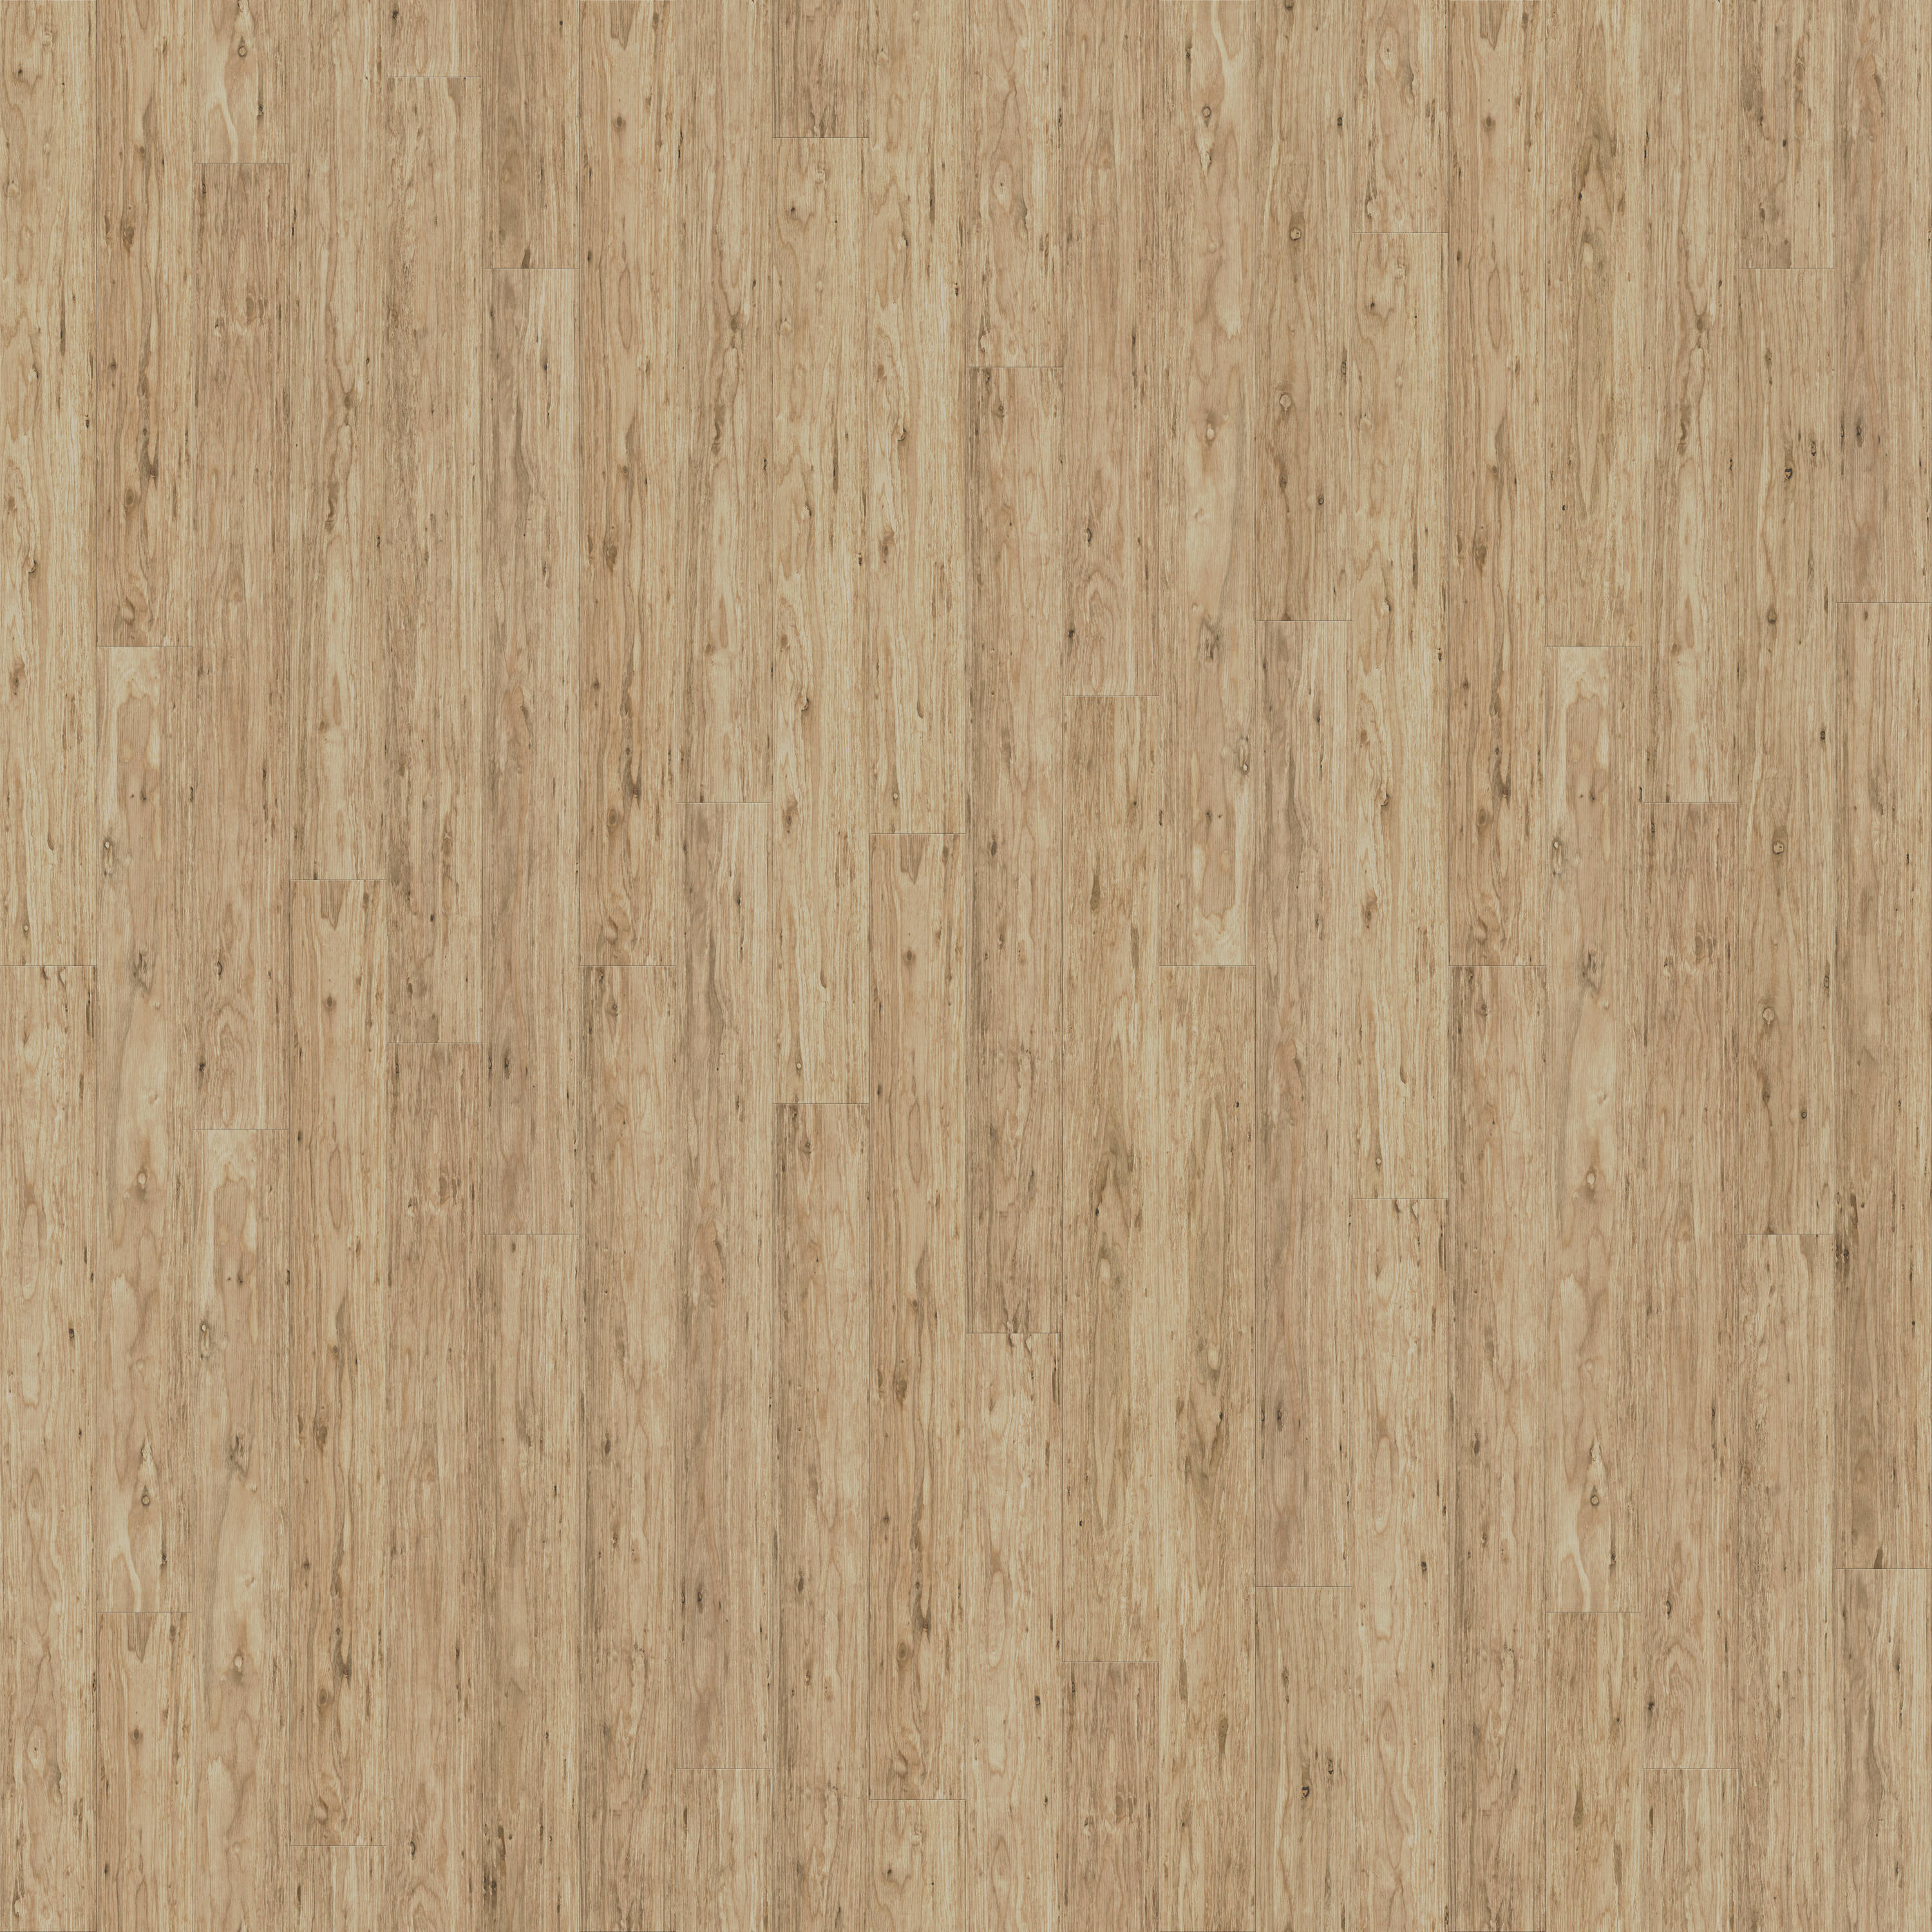 Fossilized Natural Eucalyptus 5-1/8-in W x 9/16-in T x Smooth/Traditional Solid Hardwood Flooring (27.3-sq ft) in Gold | - CALI 7007007600